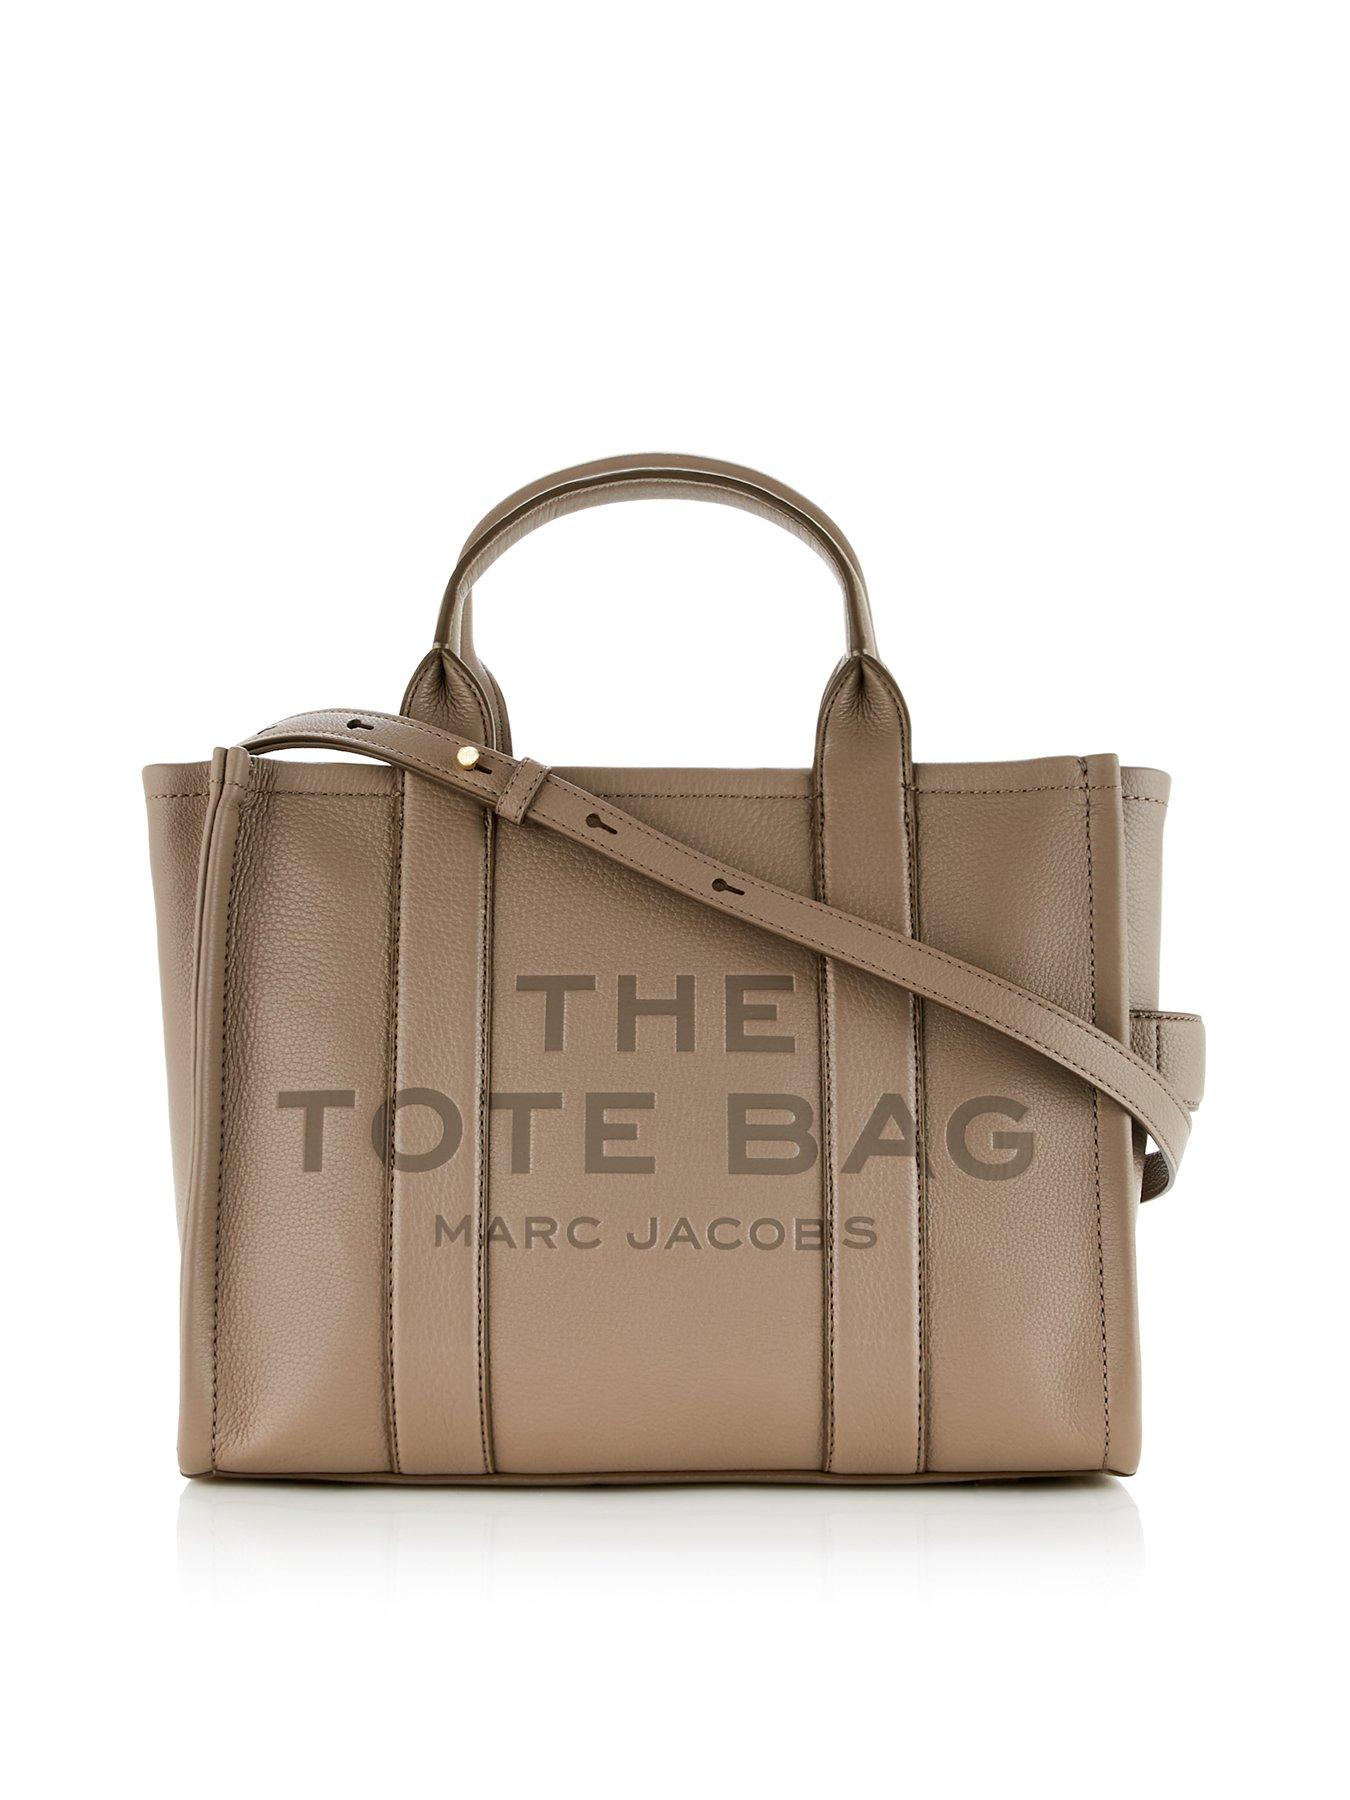 Size comparison The Marc Jacobs the Tote bag Mini, Small and Large